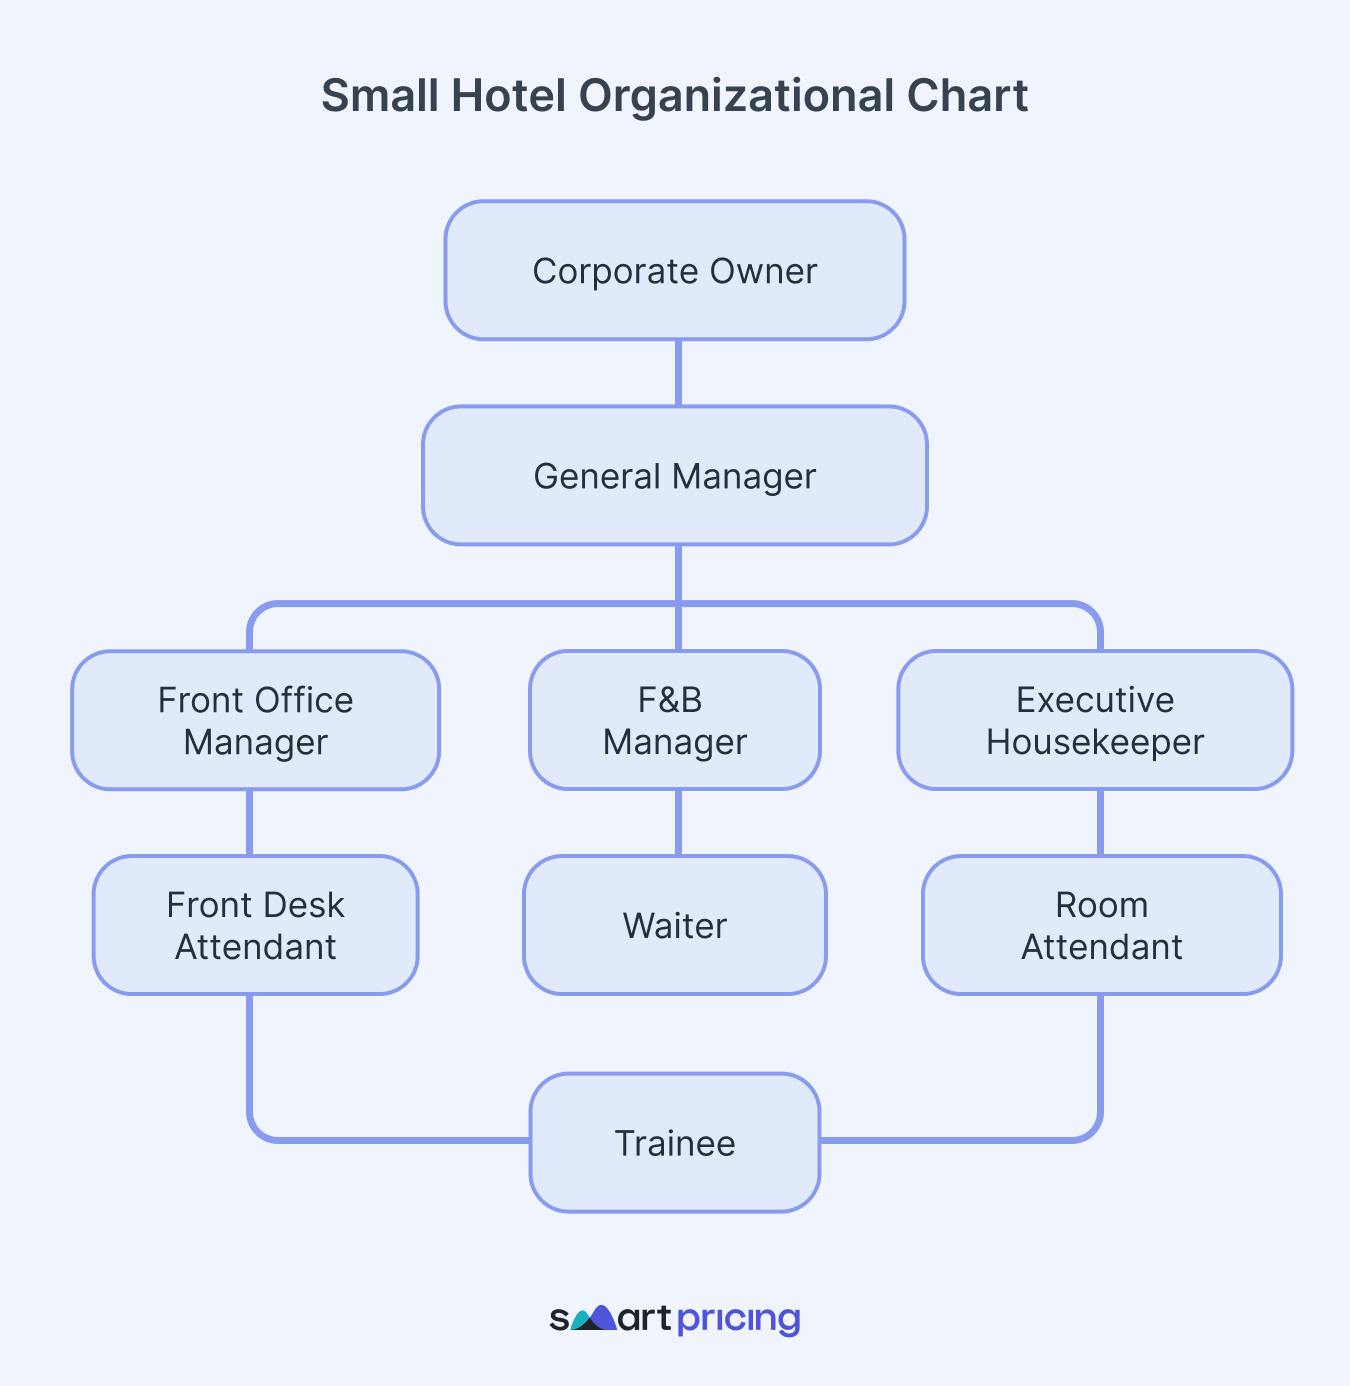 Example of an organizational chart for a hotel - Smartpricing